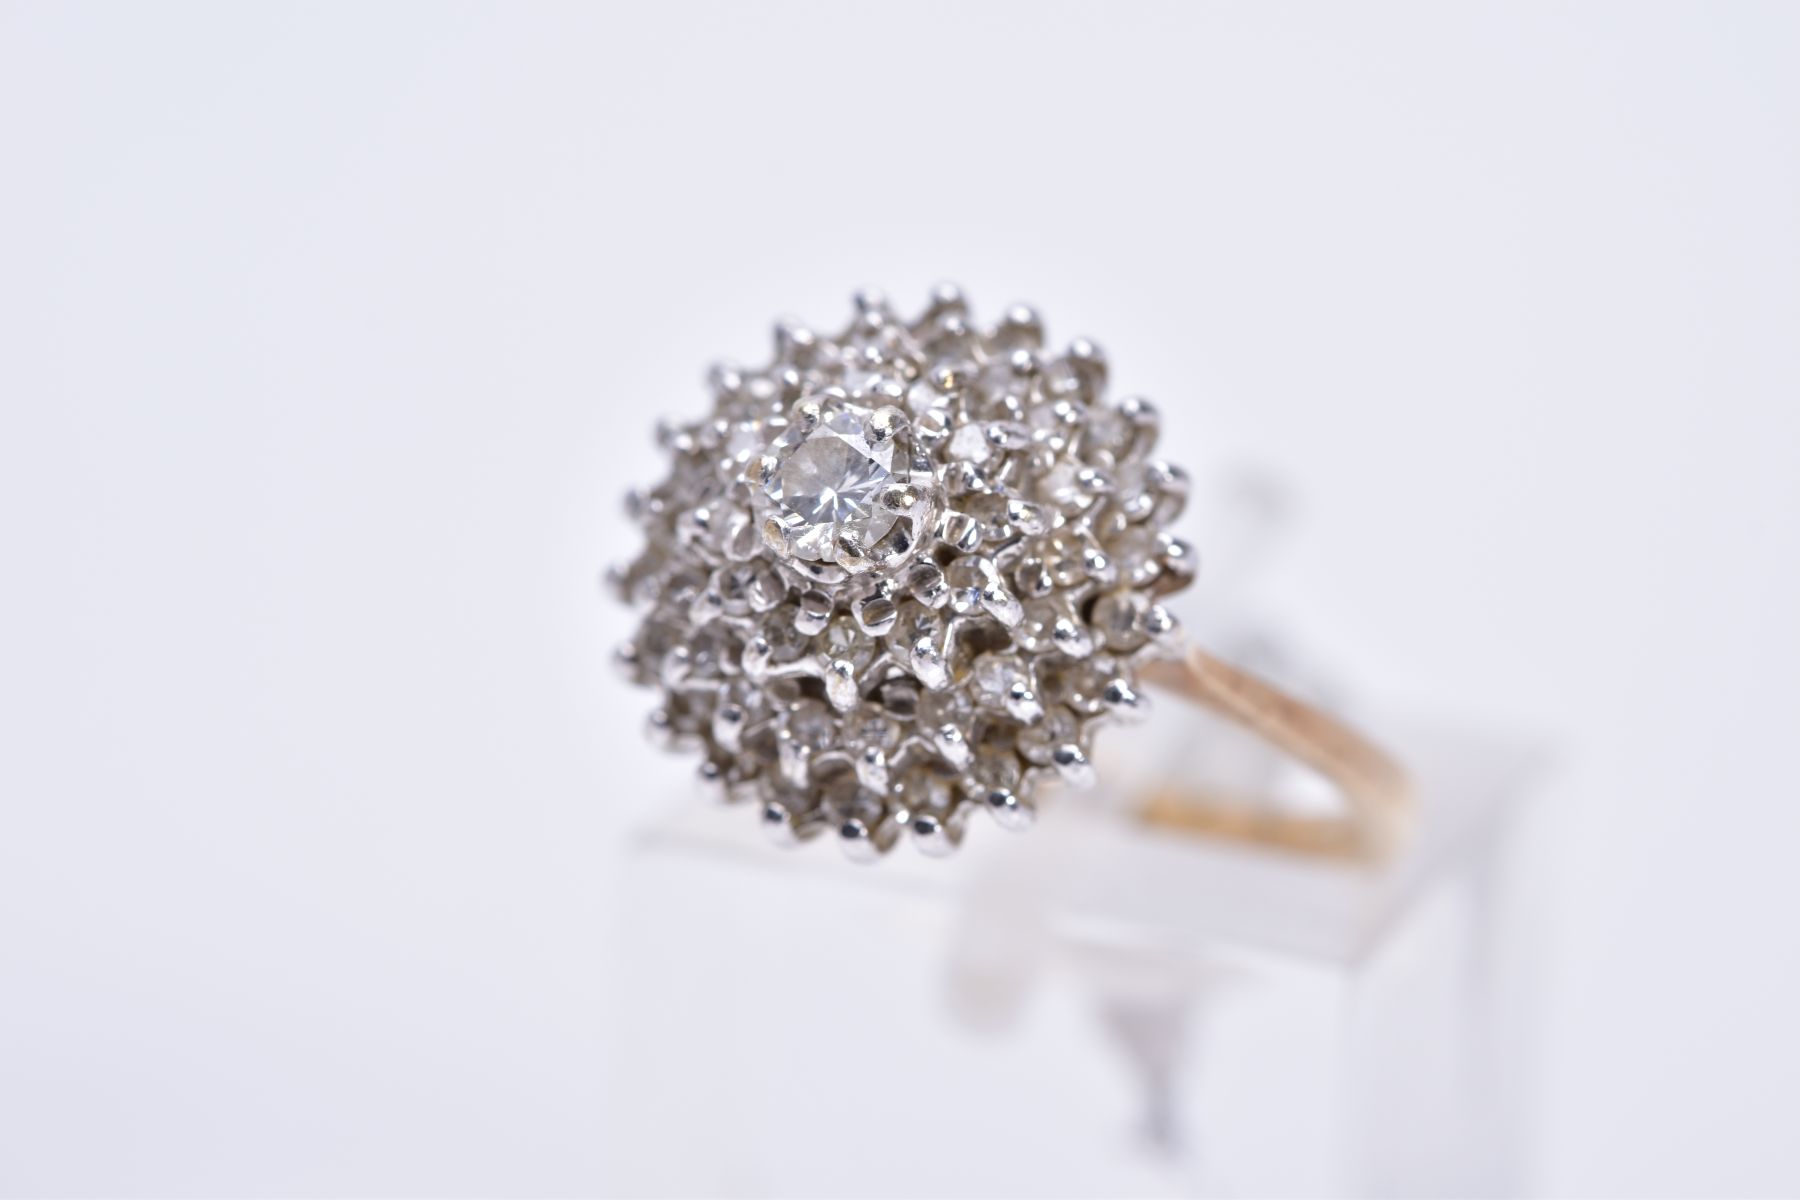 A 9CT GOLD DIAMOND CLUSTER RING, the tiered cluster with a central round brilliant cut diamond and